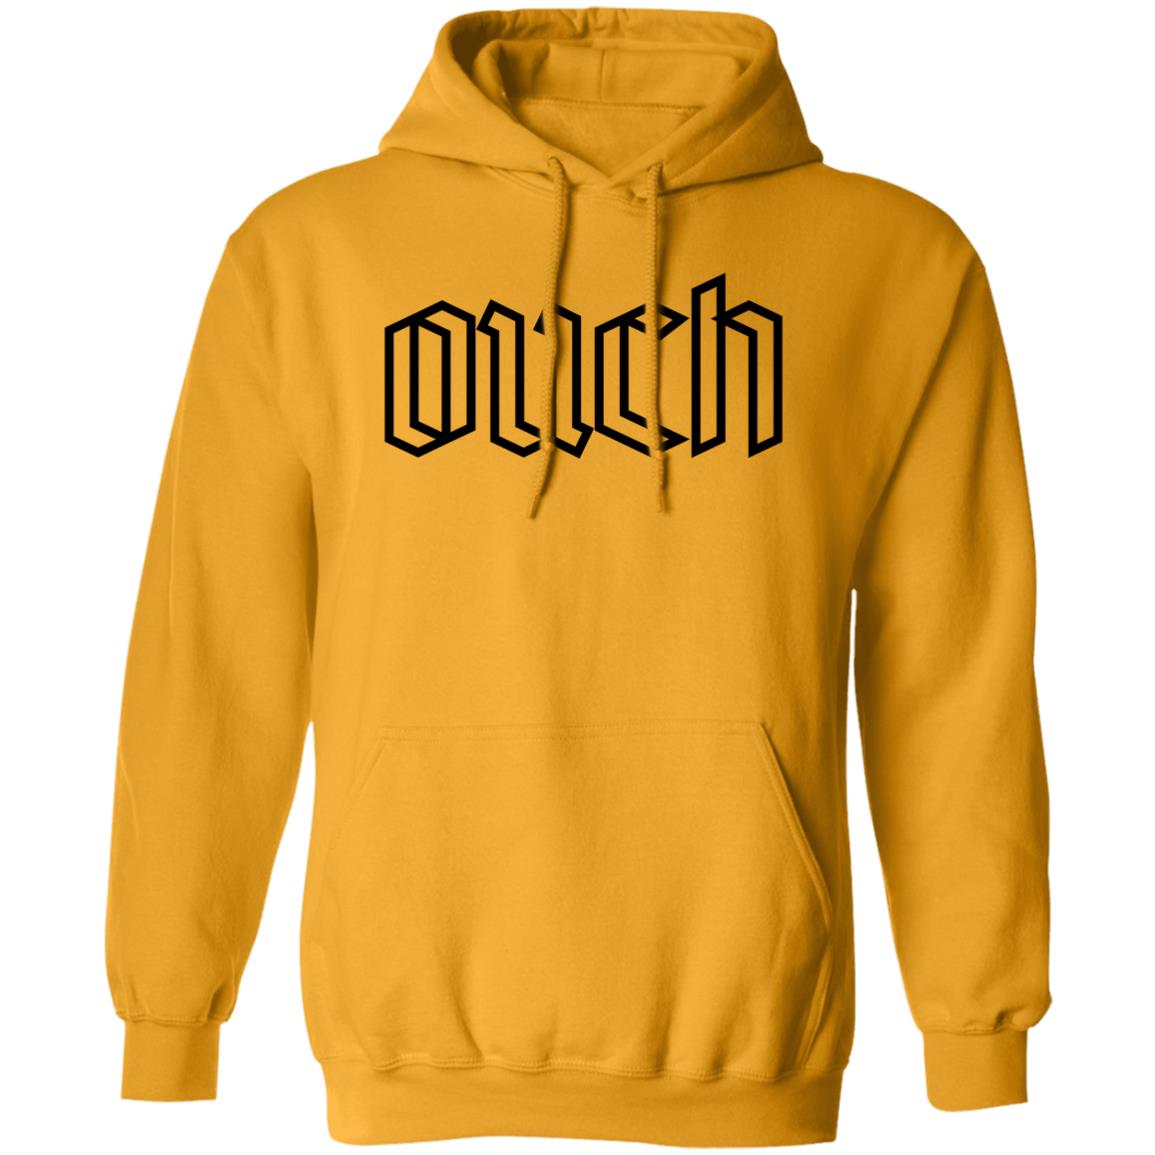 OUCH Hoodie